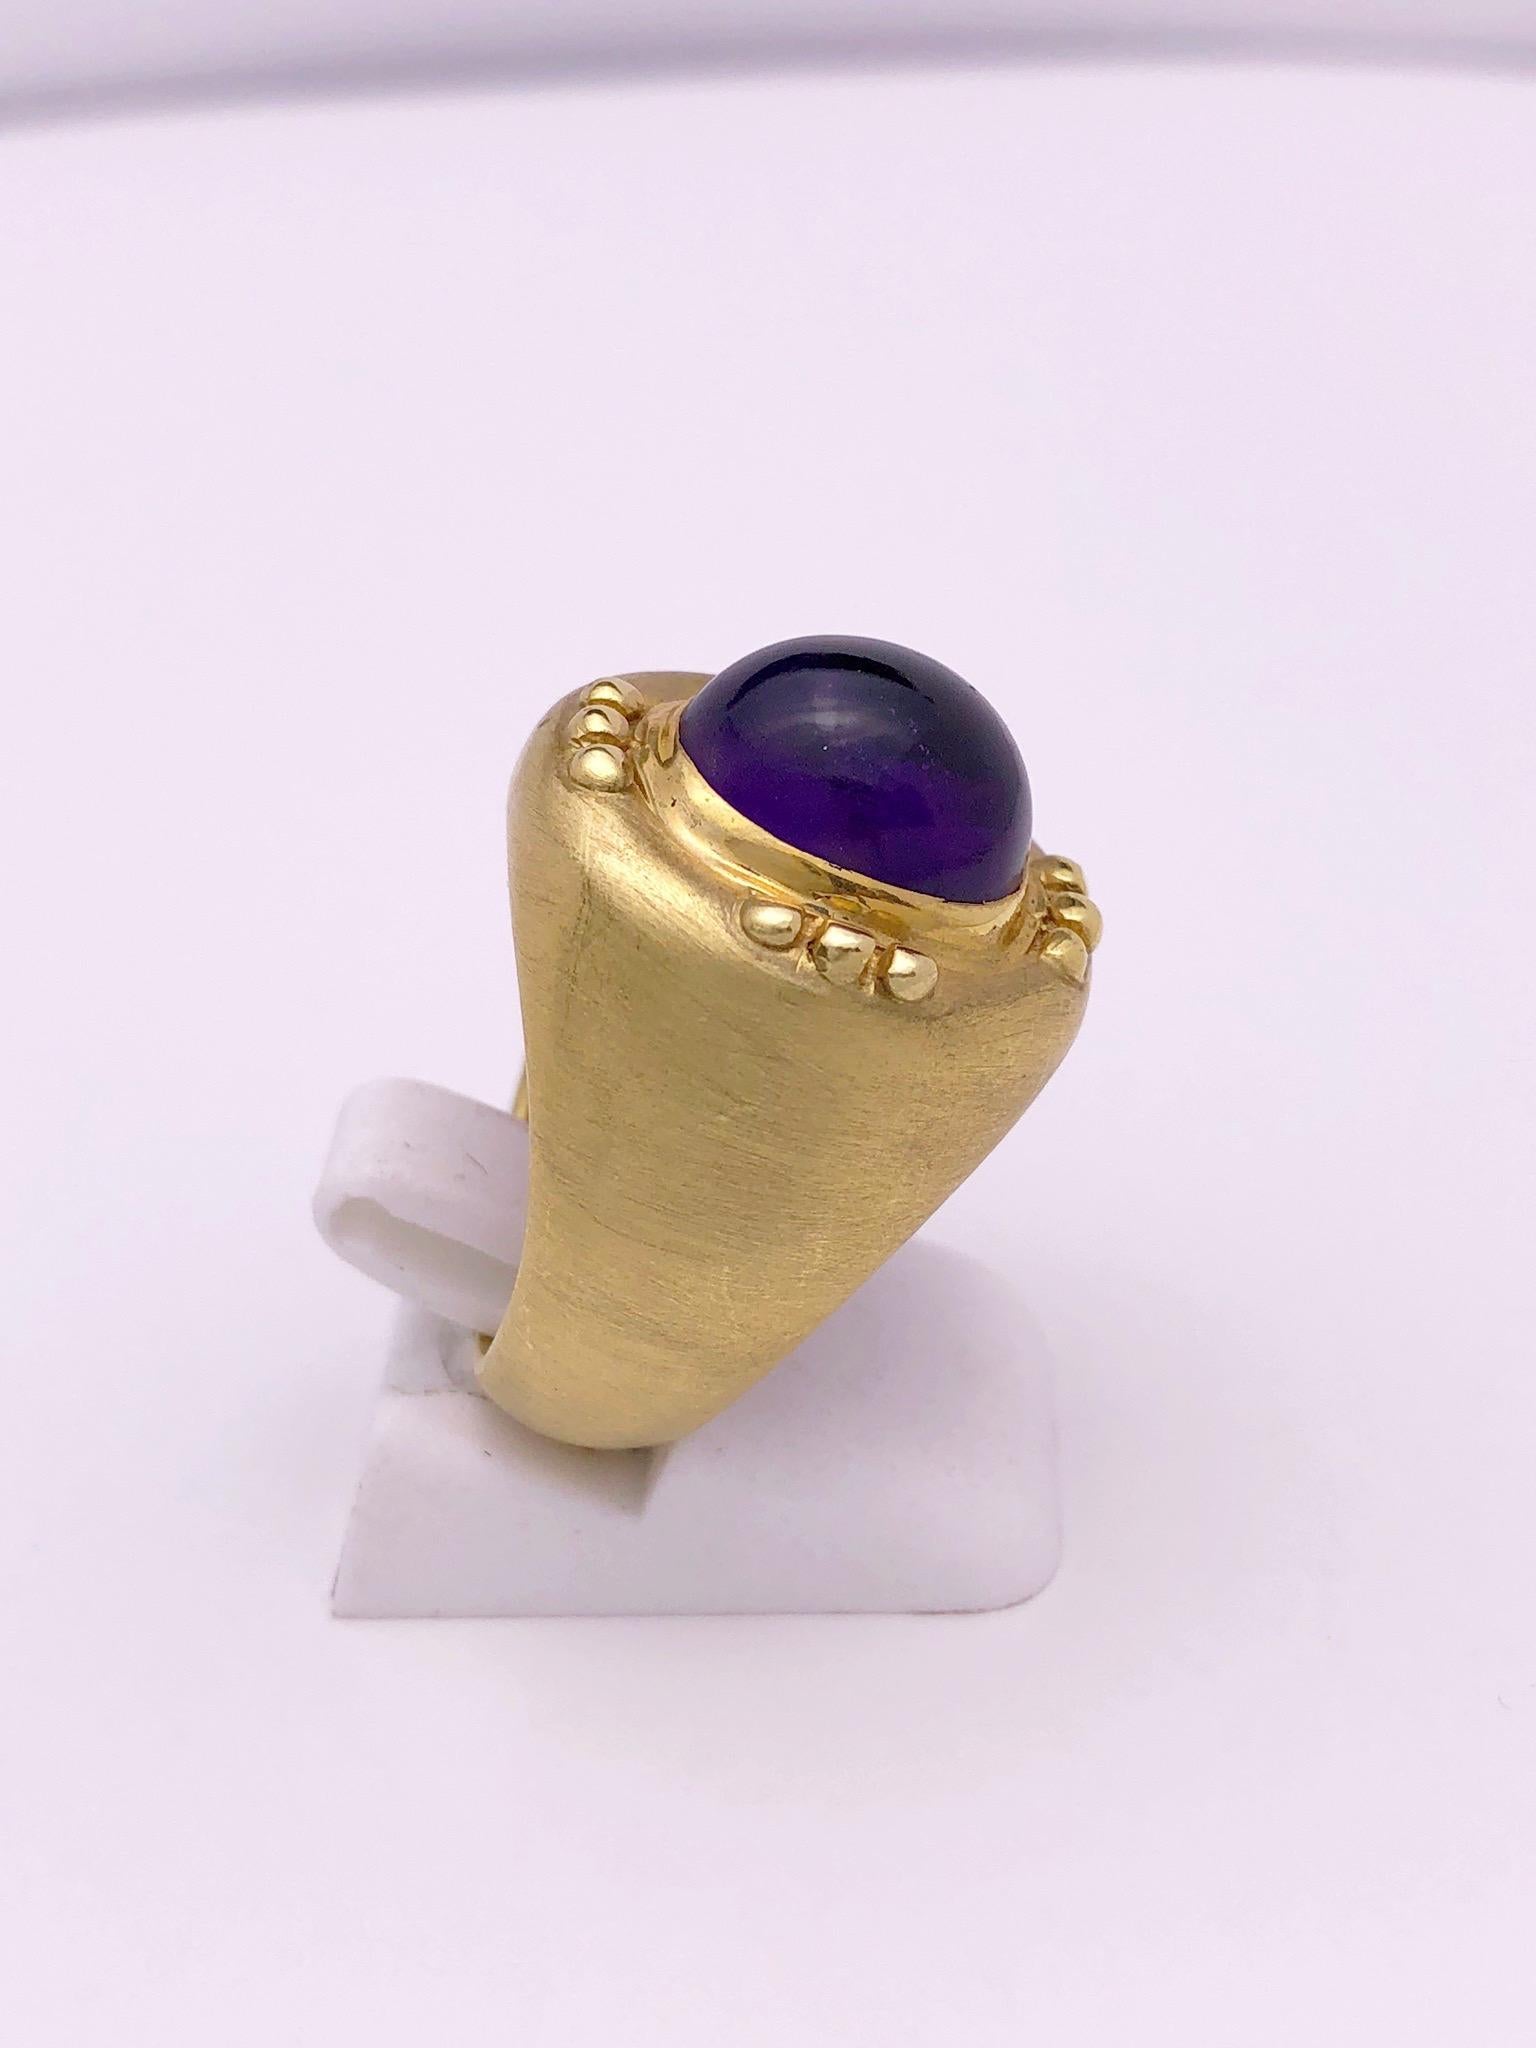 Oval Cut 18 Karat Yellow Gold Ring with Cabochon Oval Amethyst